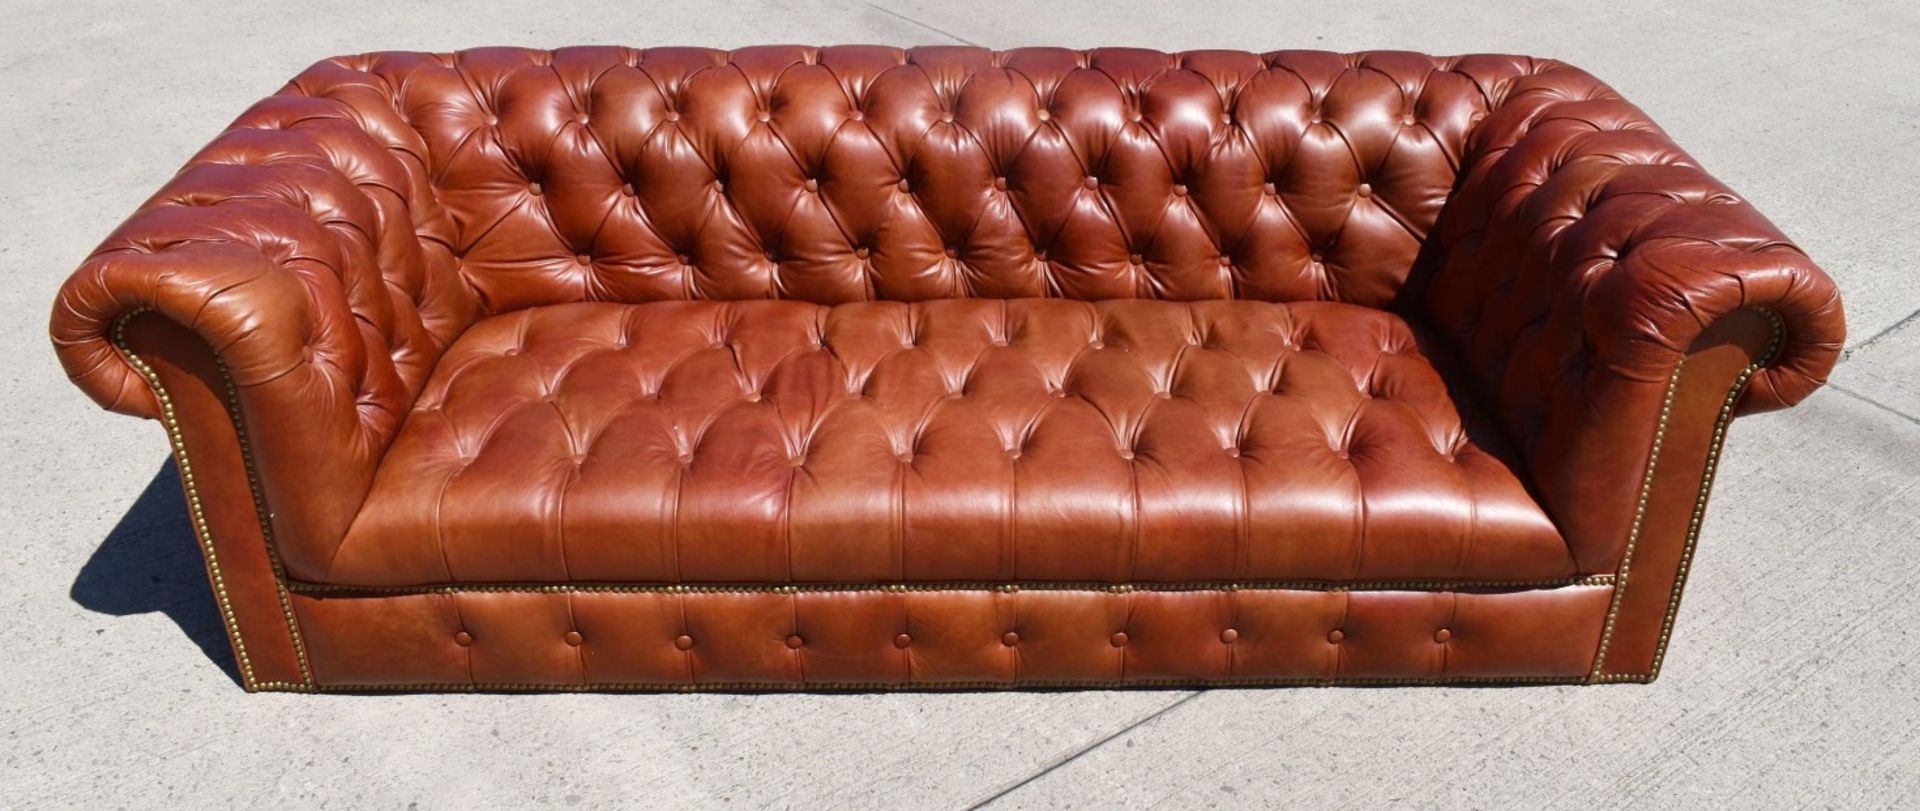 1 x TIMOTHY OULTON 'Westminster' Luxury Leather Button Sofa 2.5 Seater - Original Price £6,495 - Image 3 of 19